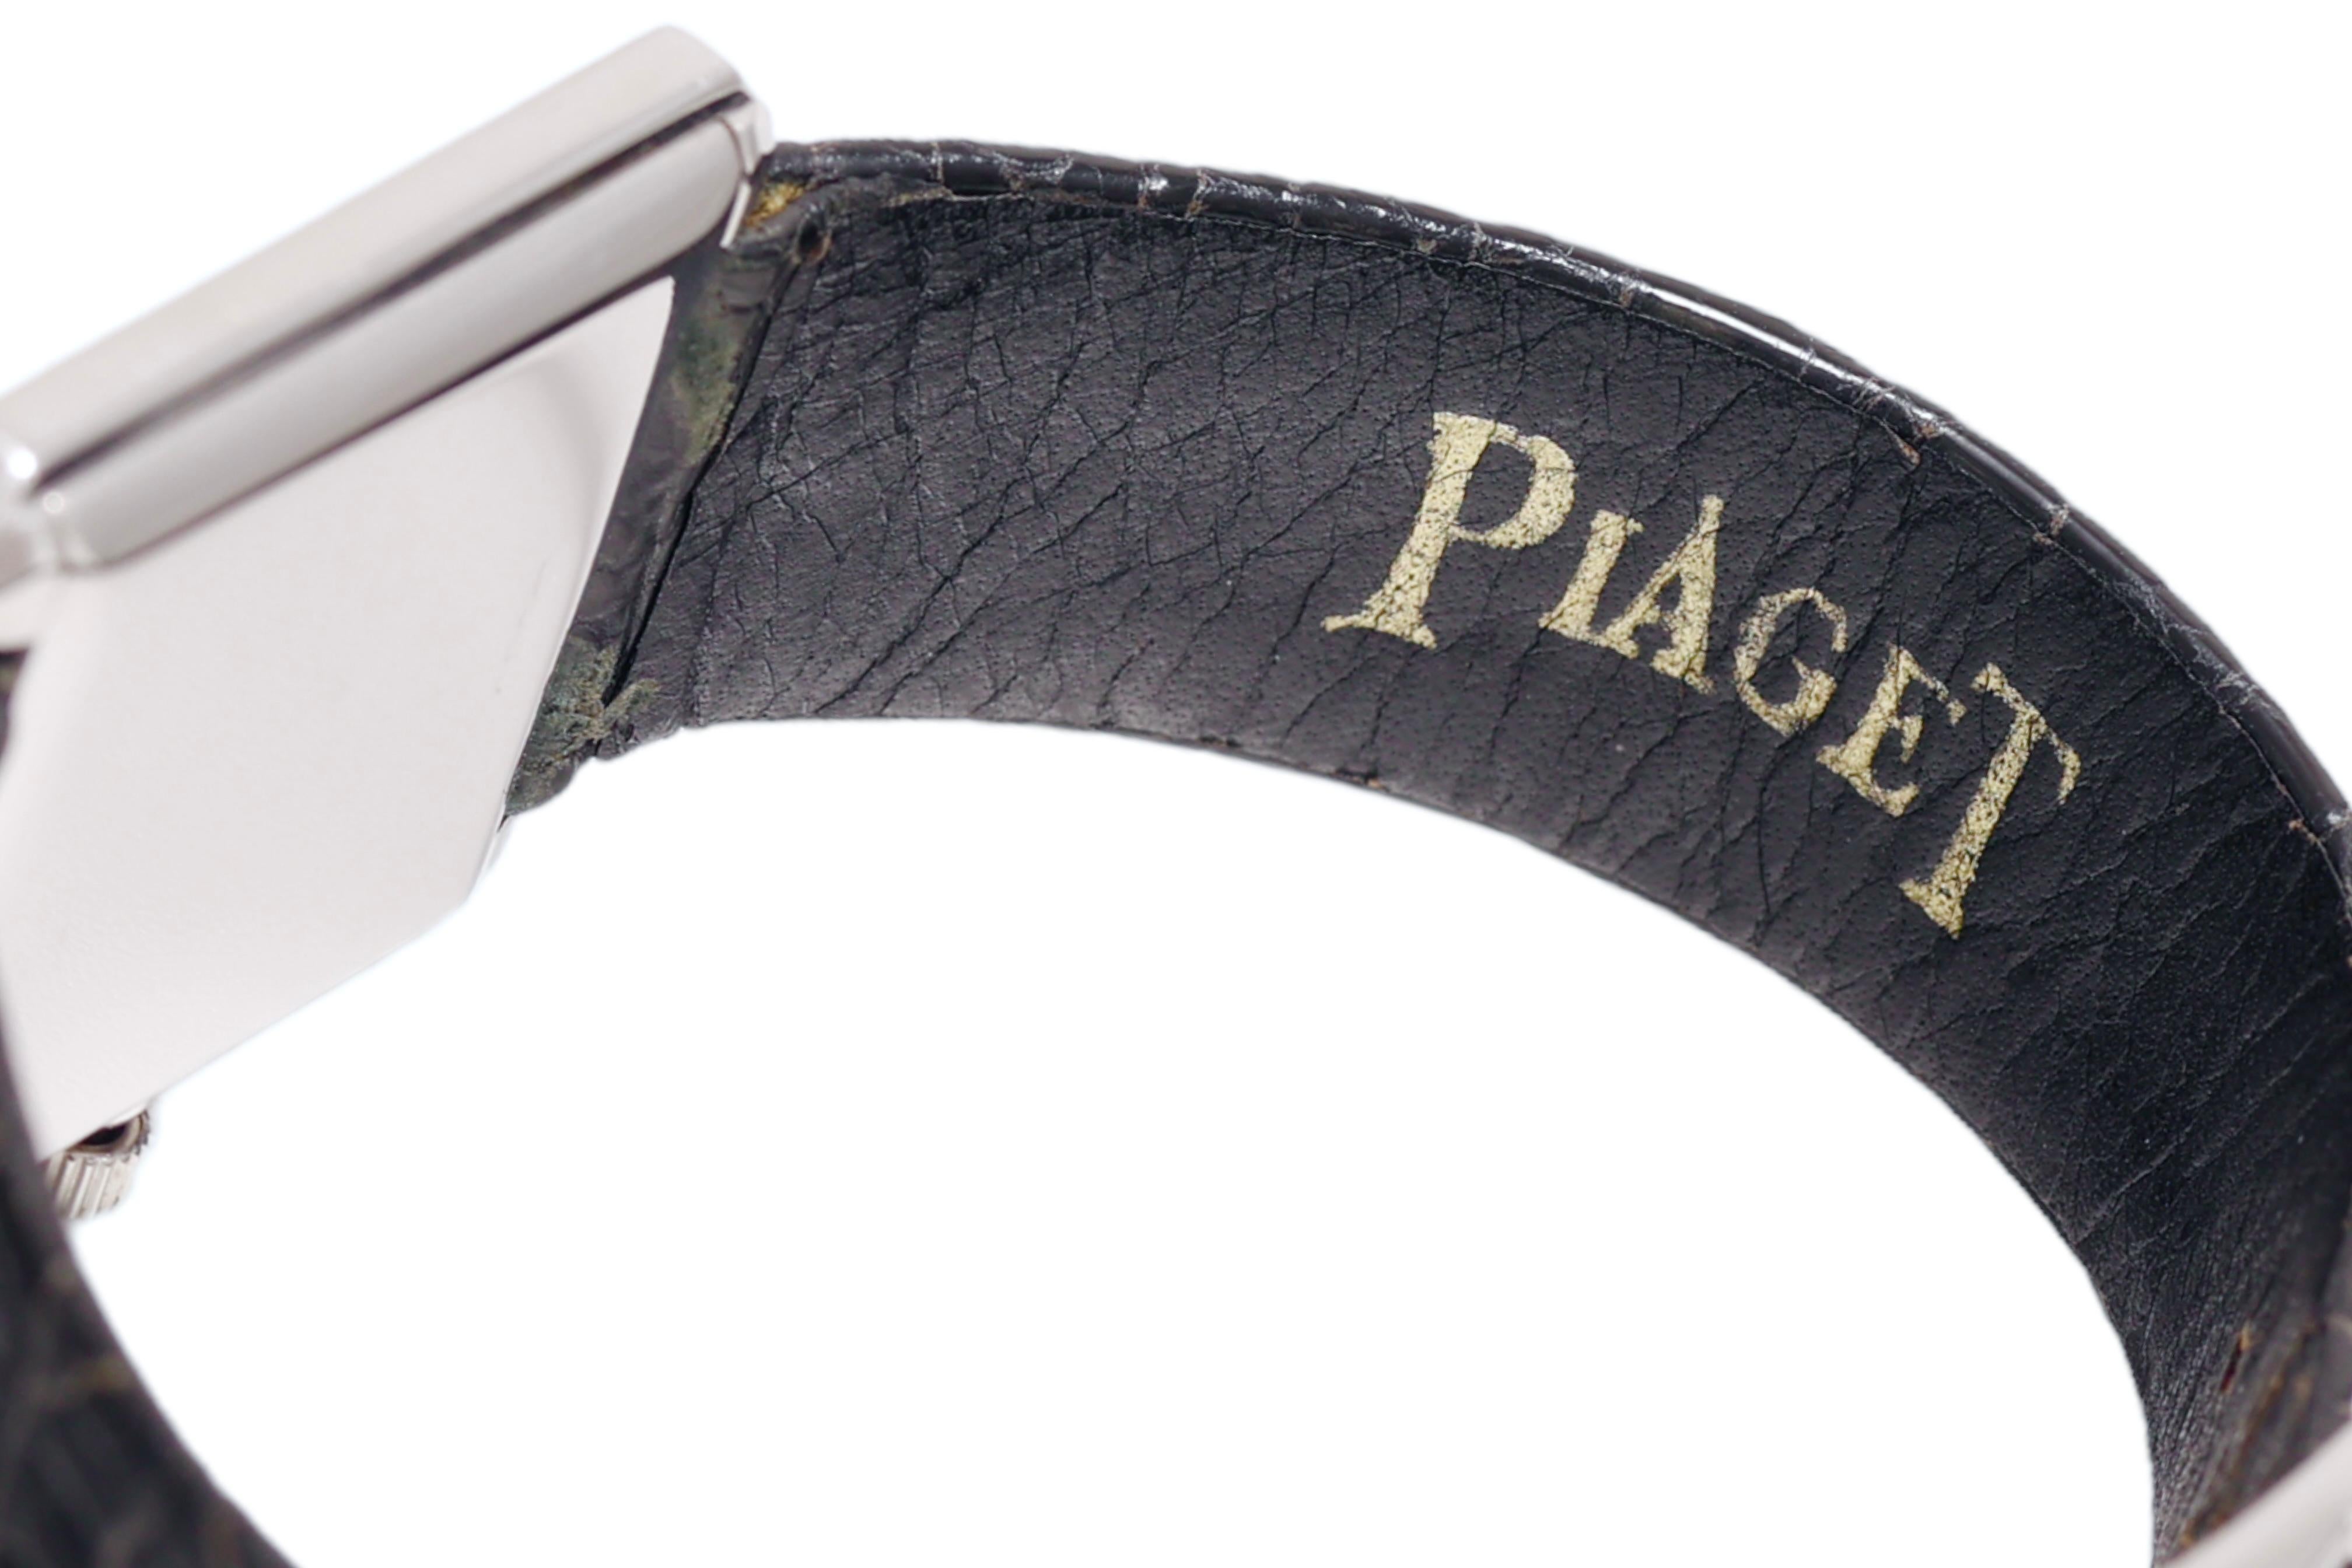 18 Kt White Gold Piaget Protocole Wrist Watch, Manual Winding For Sale 3